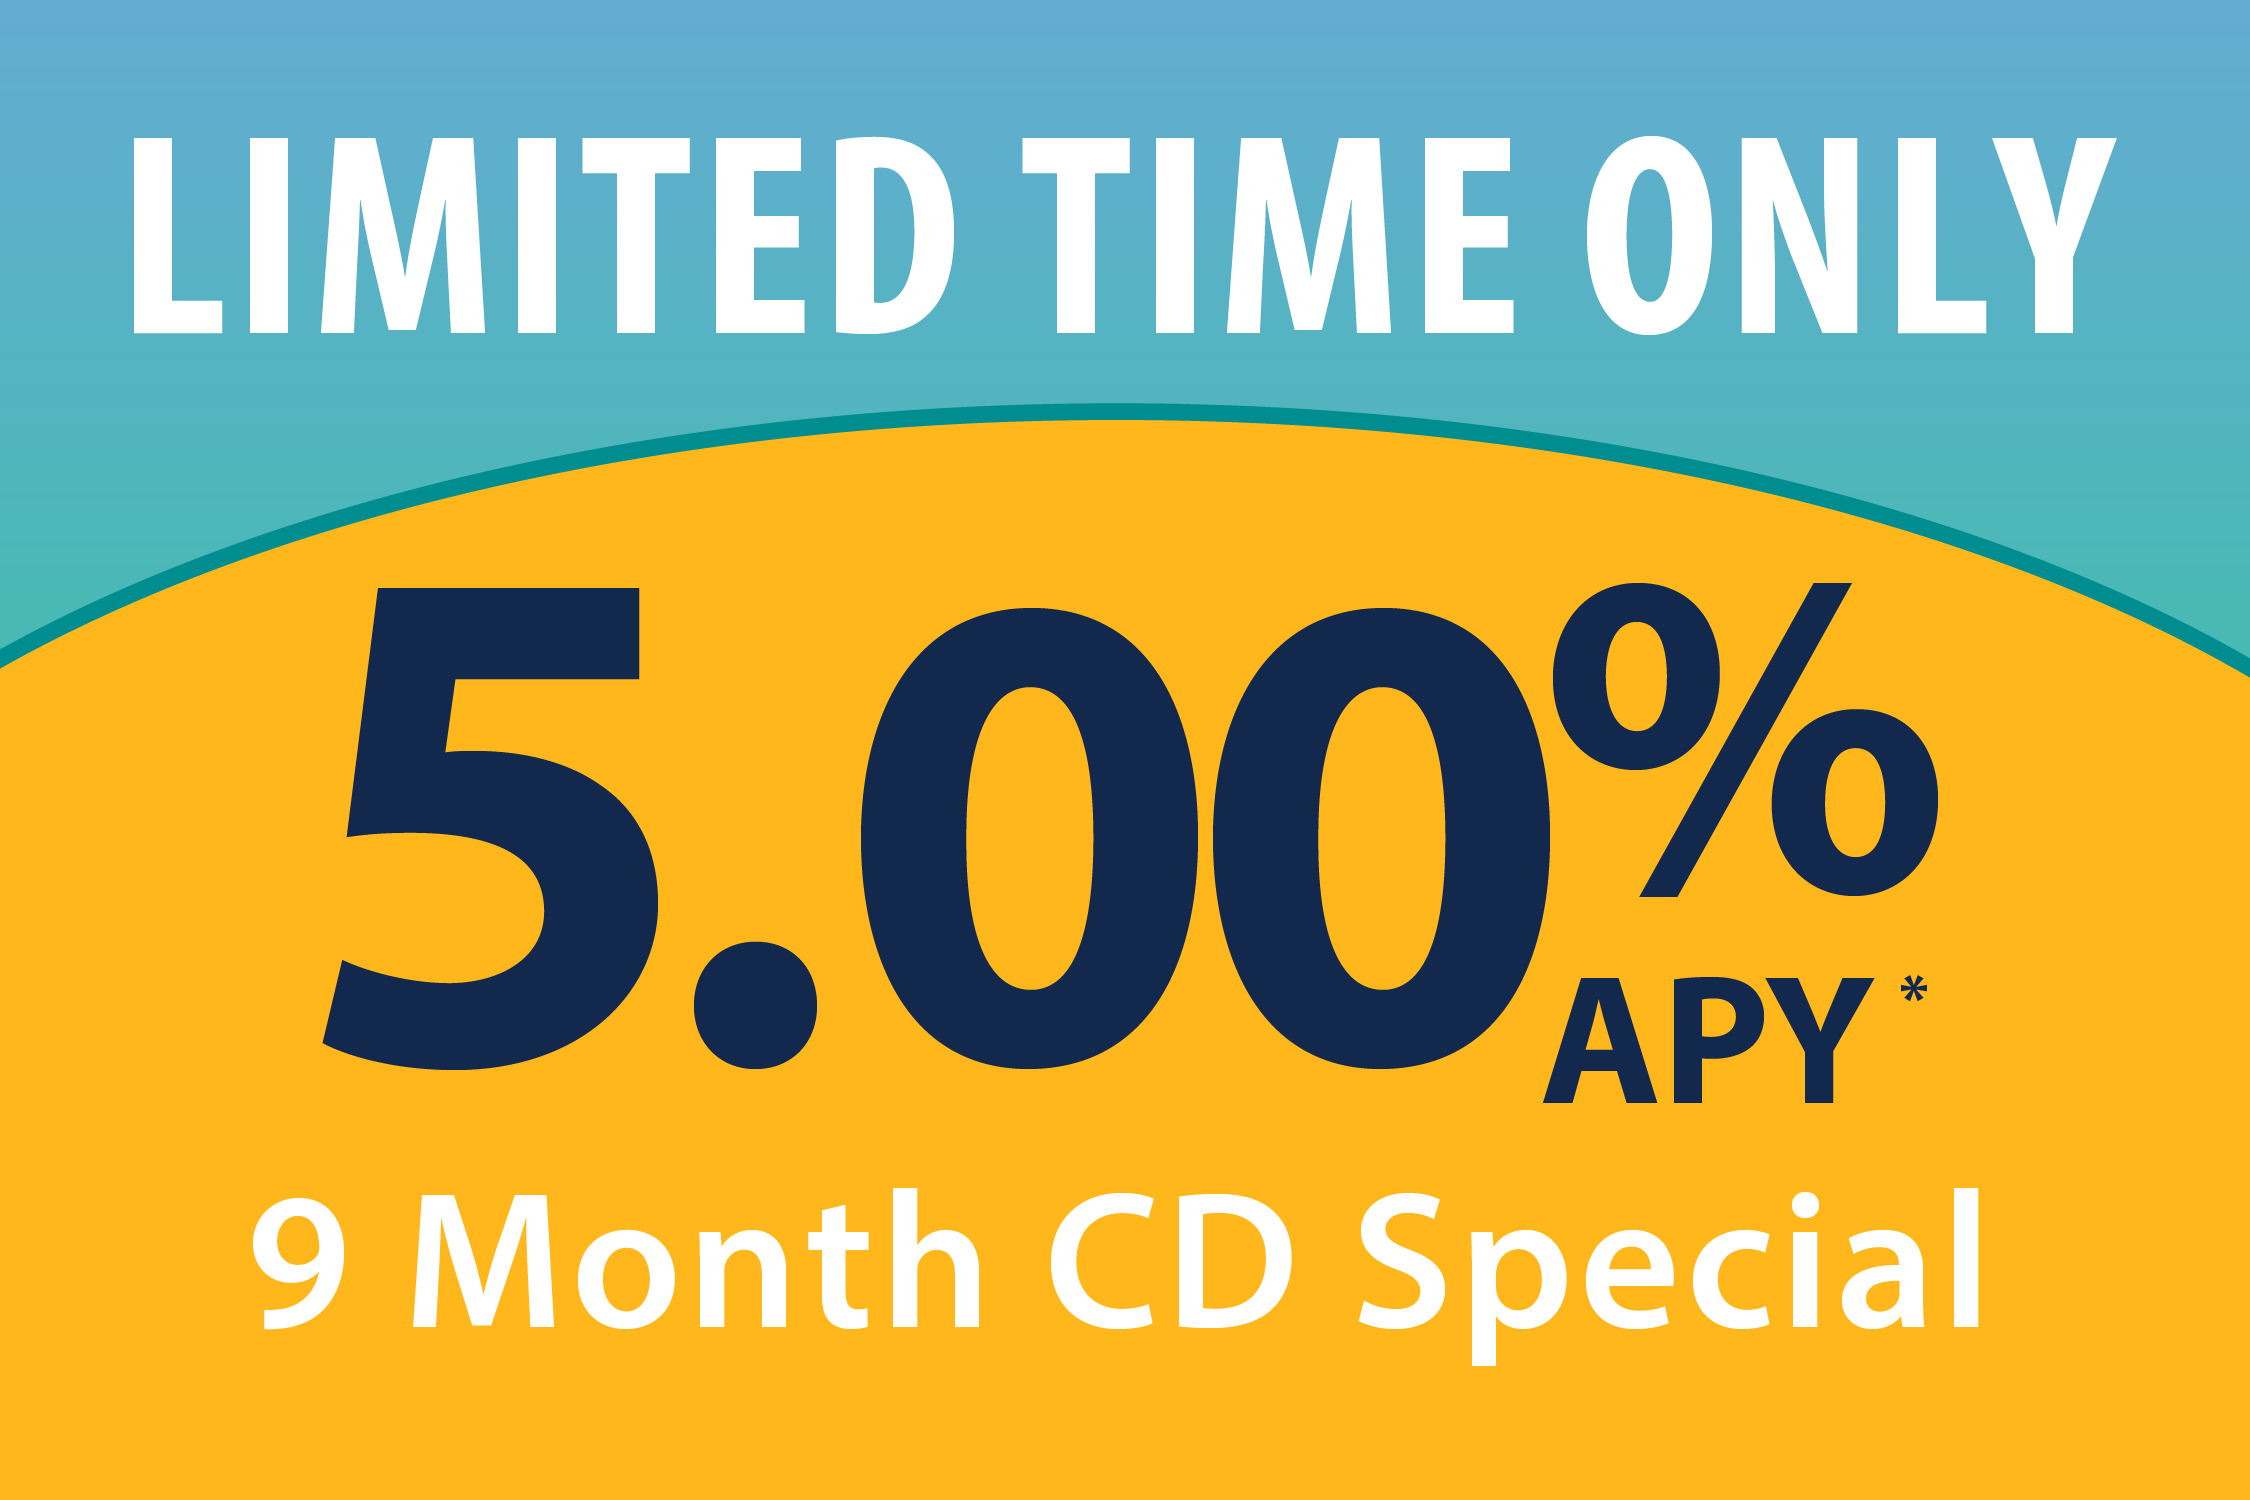 5.00% APY Limited Time Only 9 Month CD